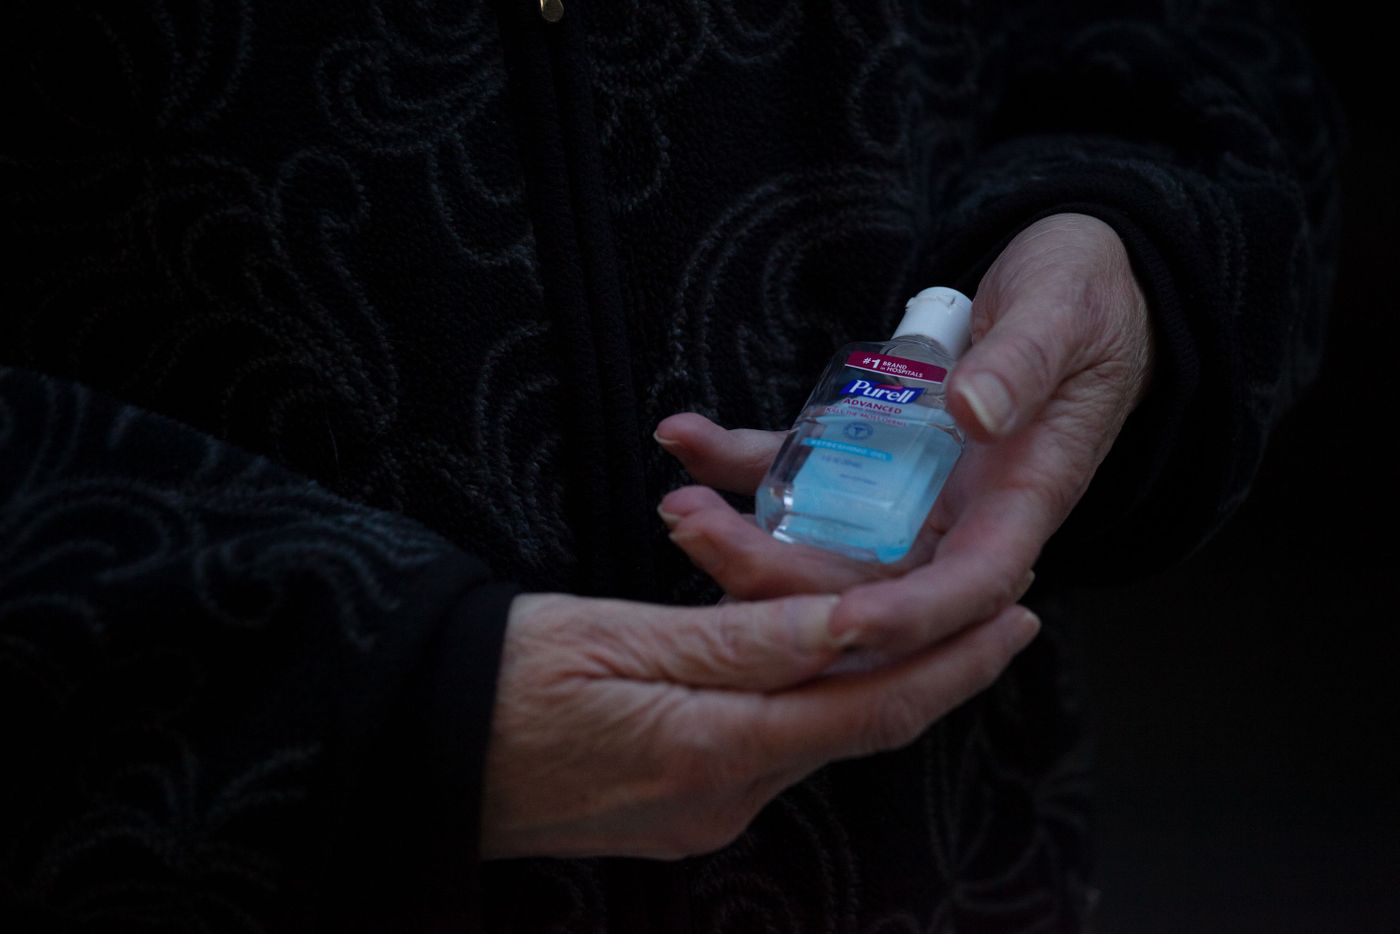 Carol Davis constantly uses hand sanitizer as she battles cancer and concerns over COVID-19.